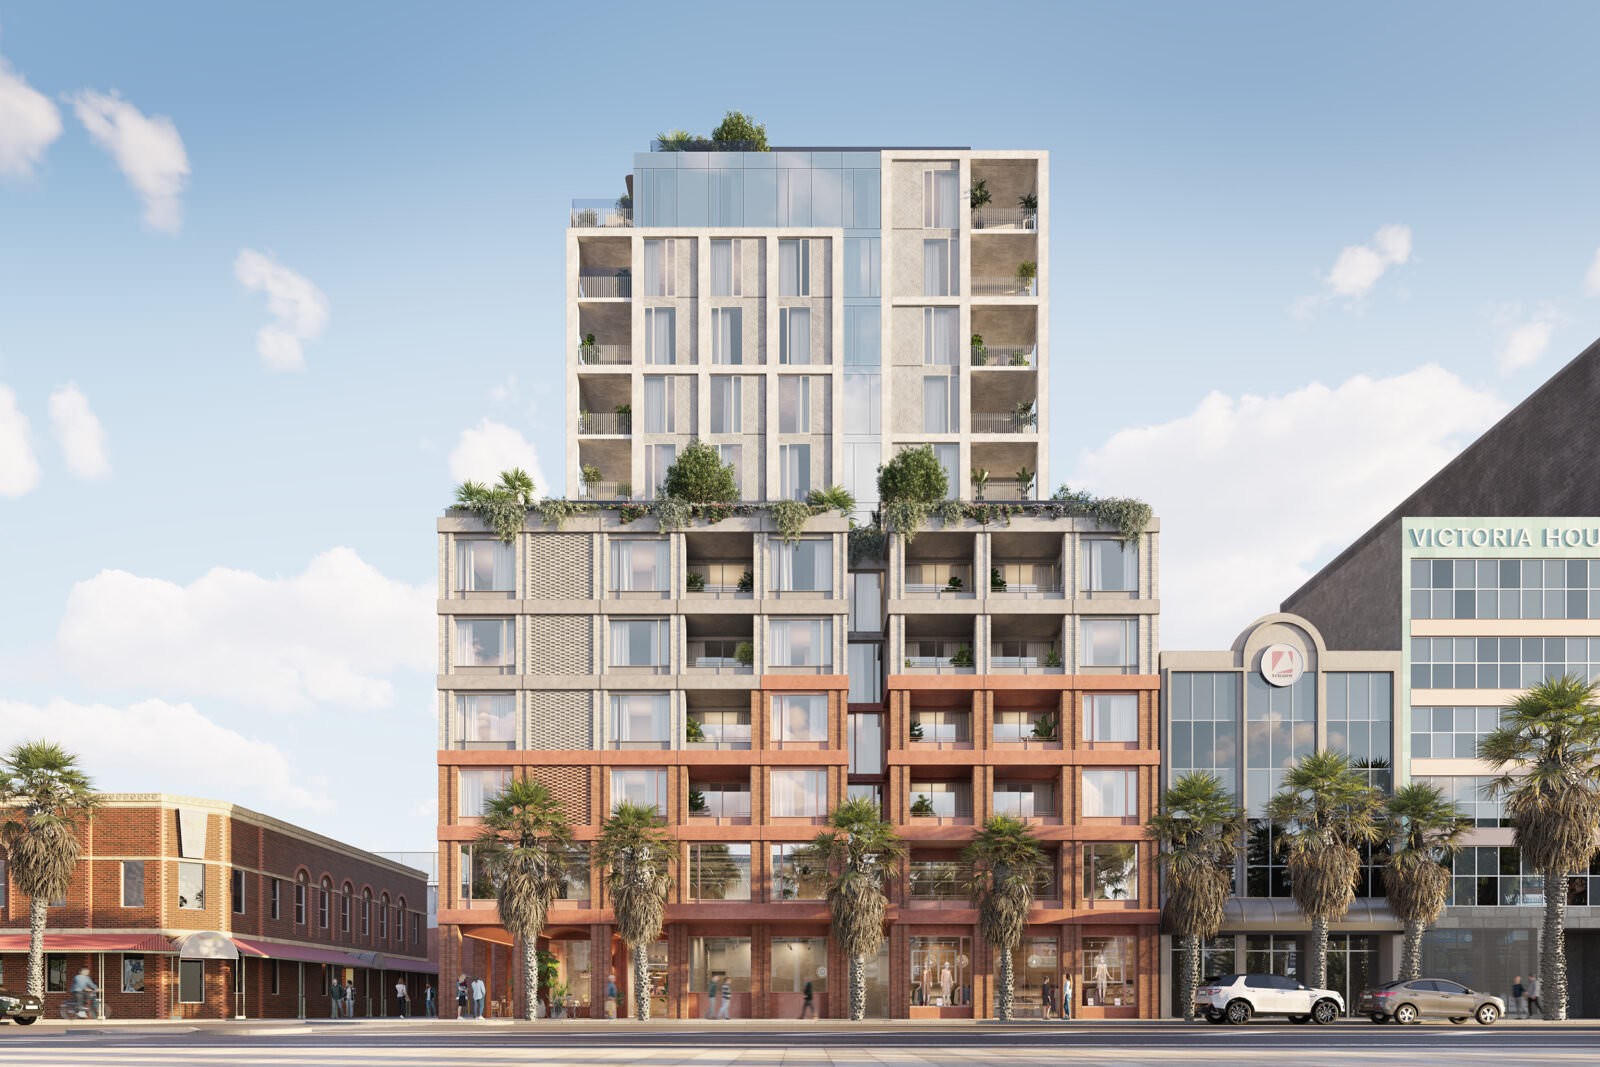 58 Apartments in High-Rise Tower Approved for Geelong CBD